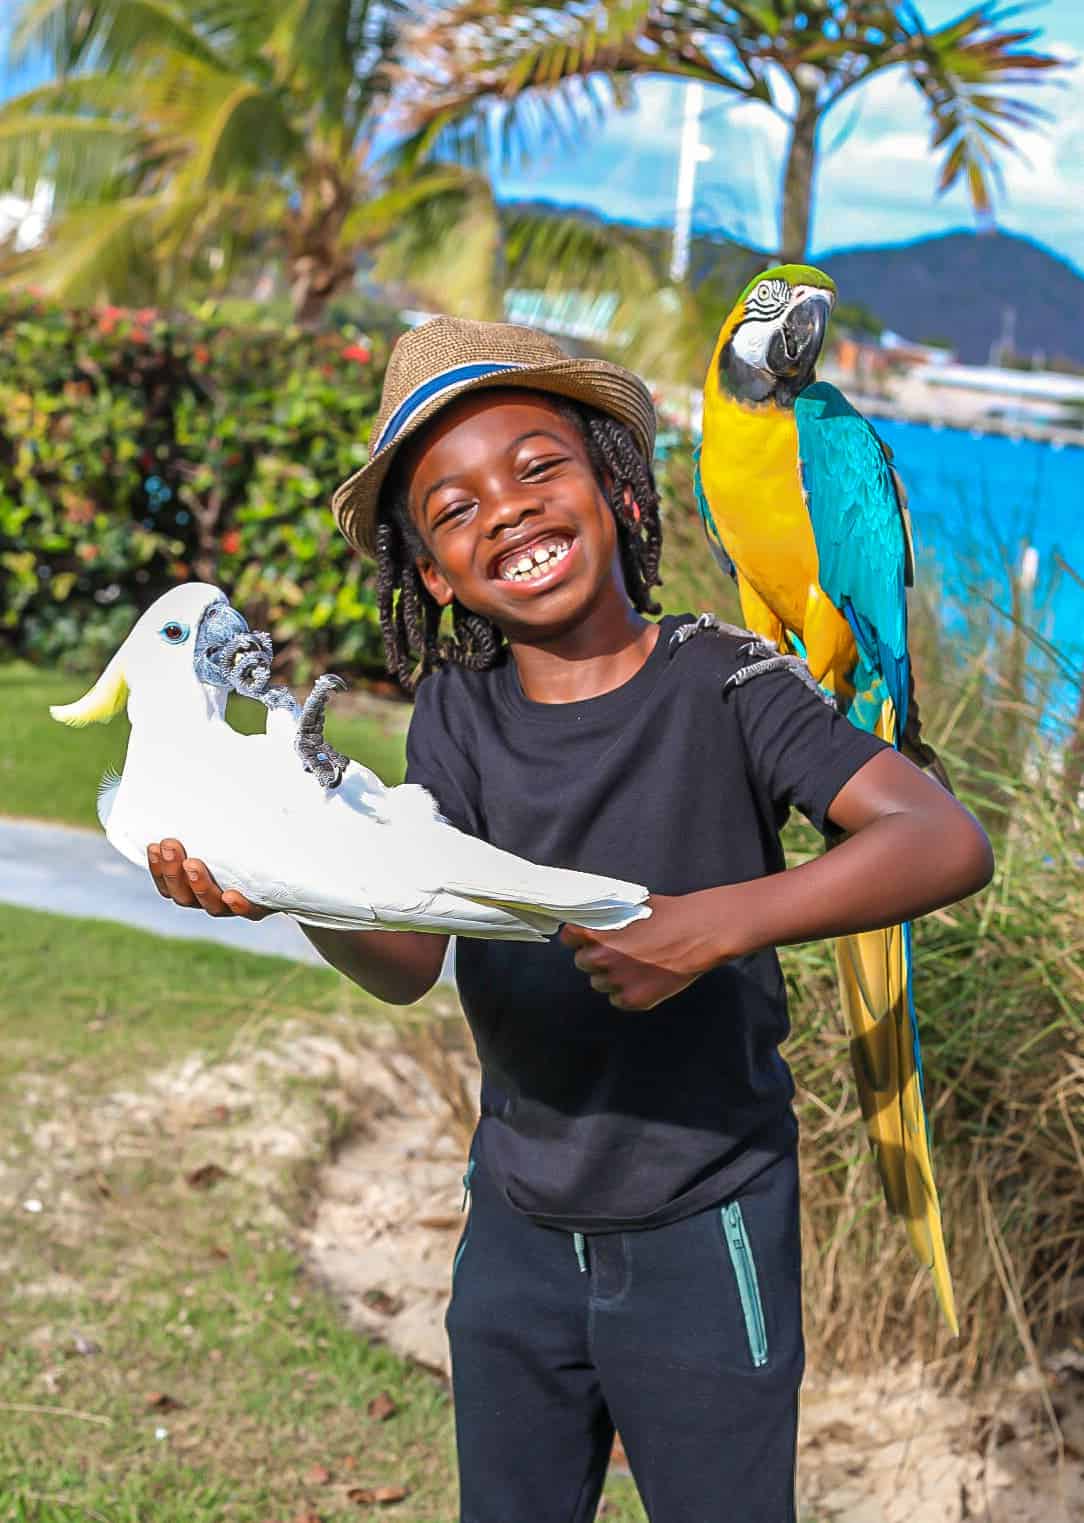 Things To Do In St. Thomas With or Without Kids